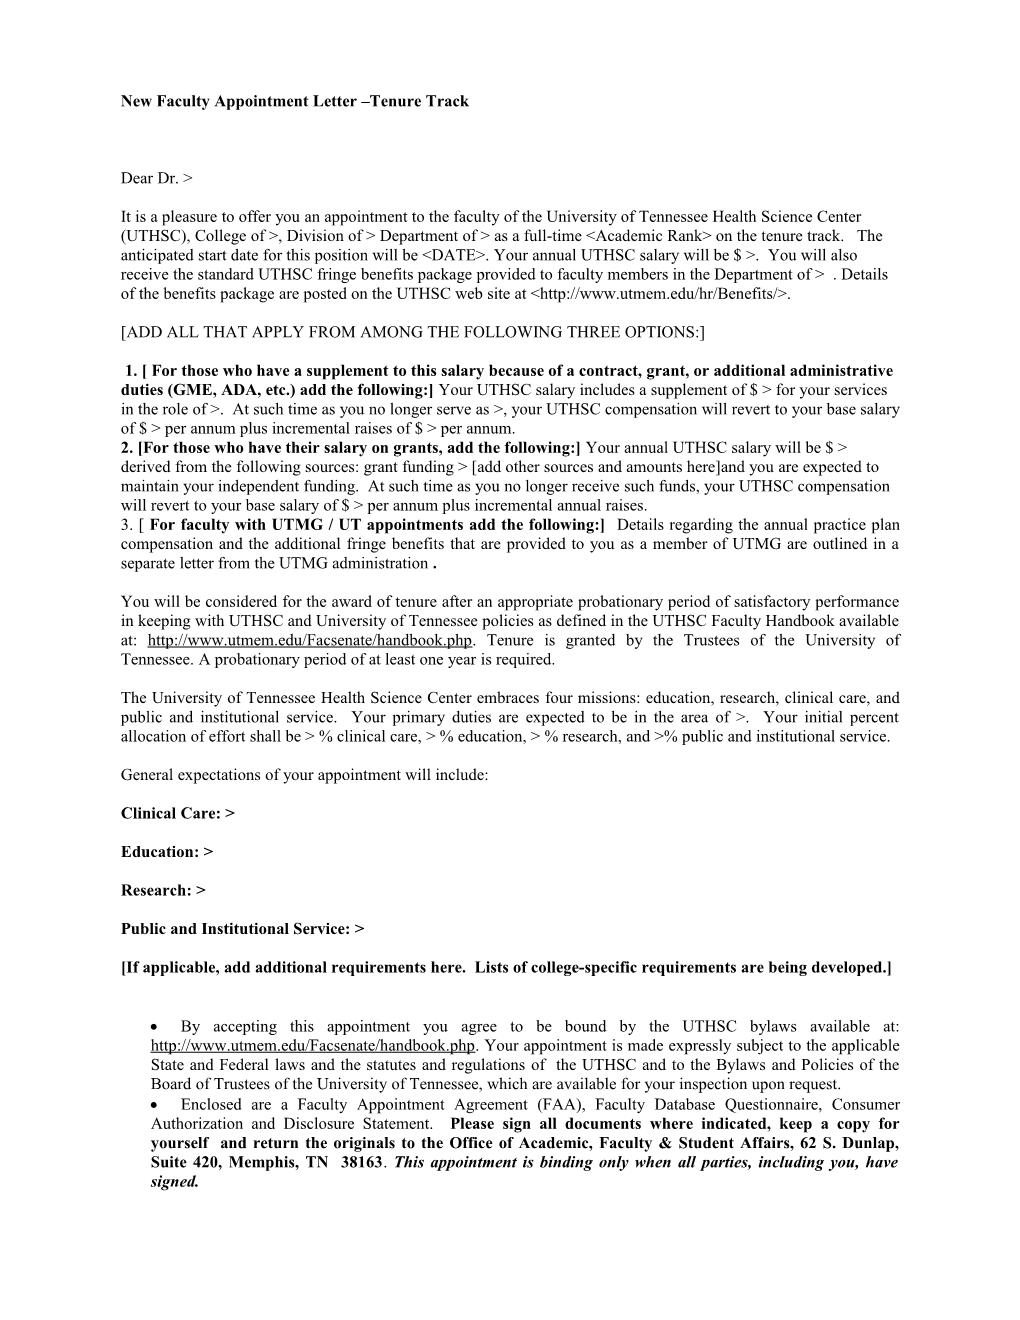 New Faculty Appointment Letter Tenure Track